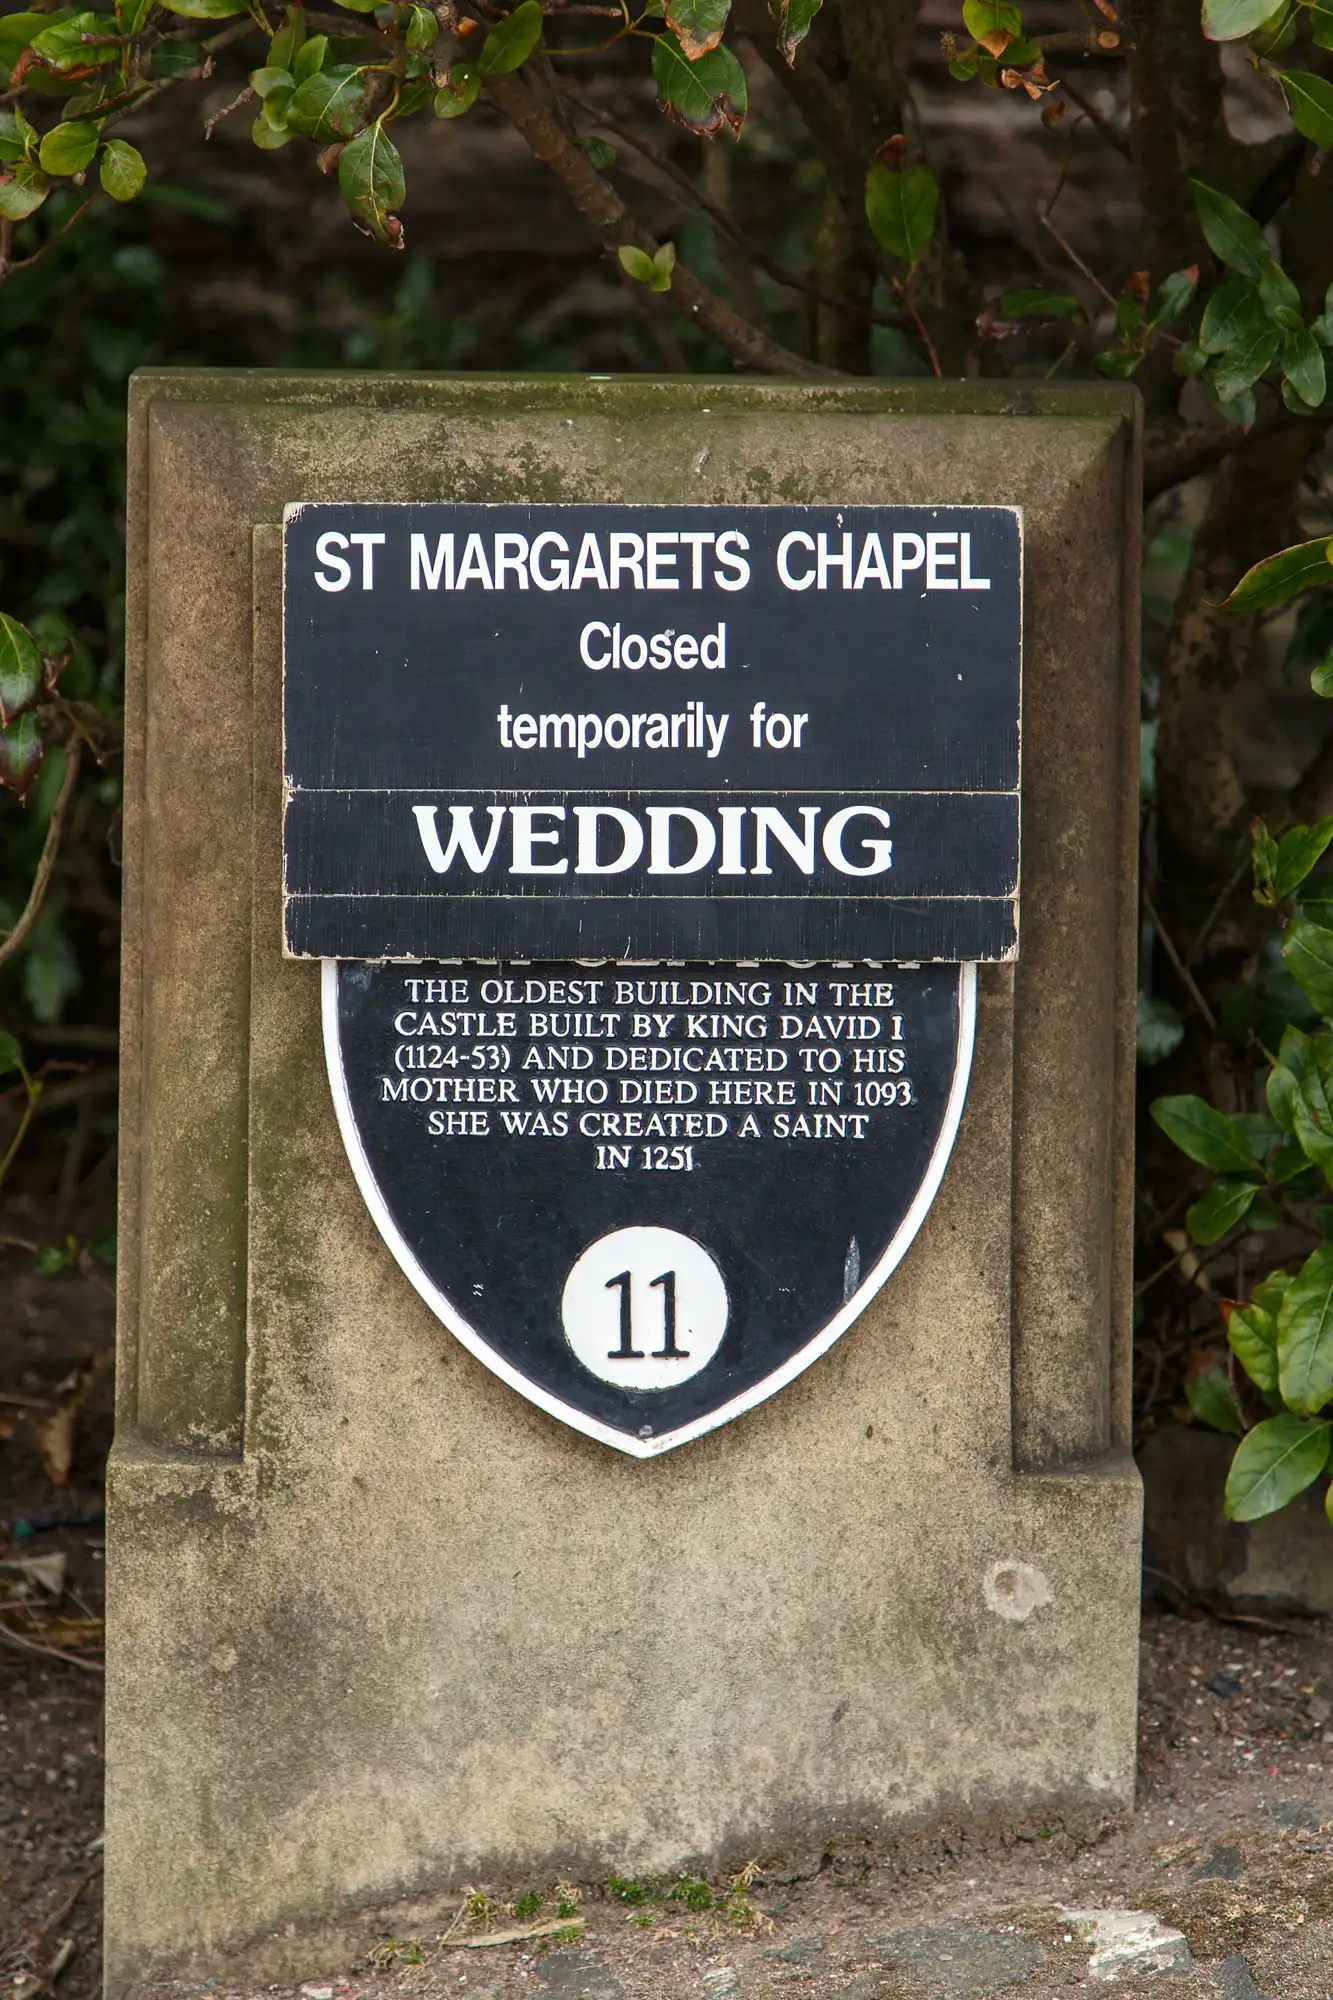 A sign at st margaret's chapel stating it is closed for a wedding, with historical information about the building and its dedication to saint margaret.